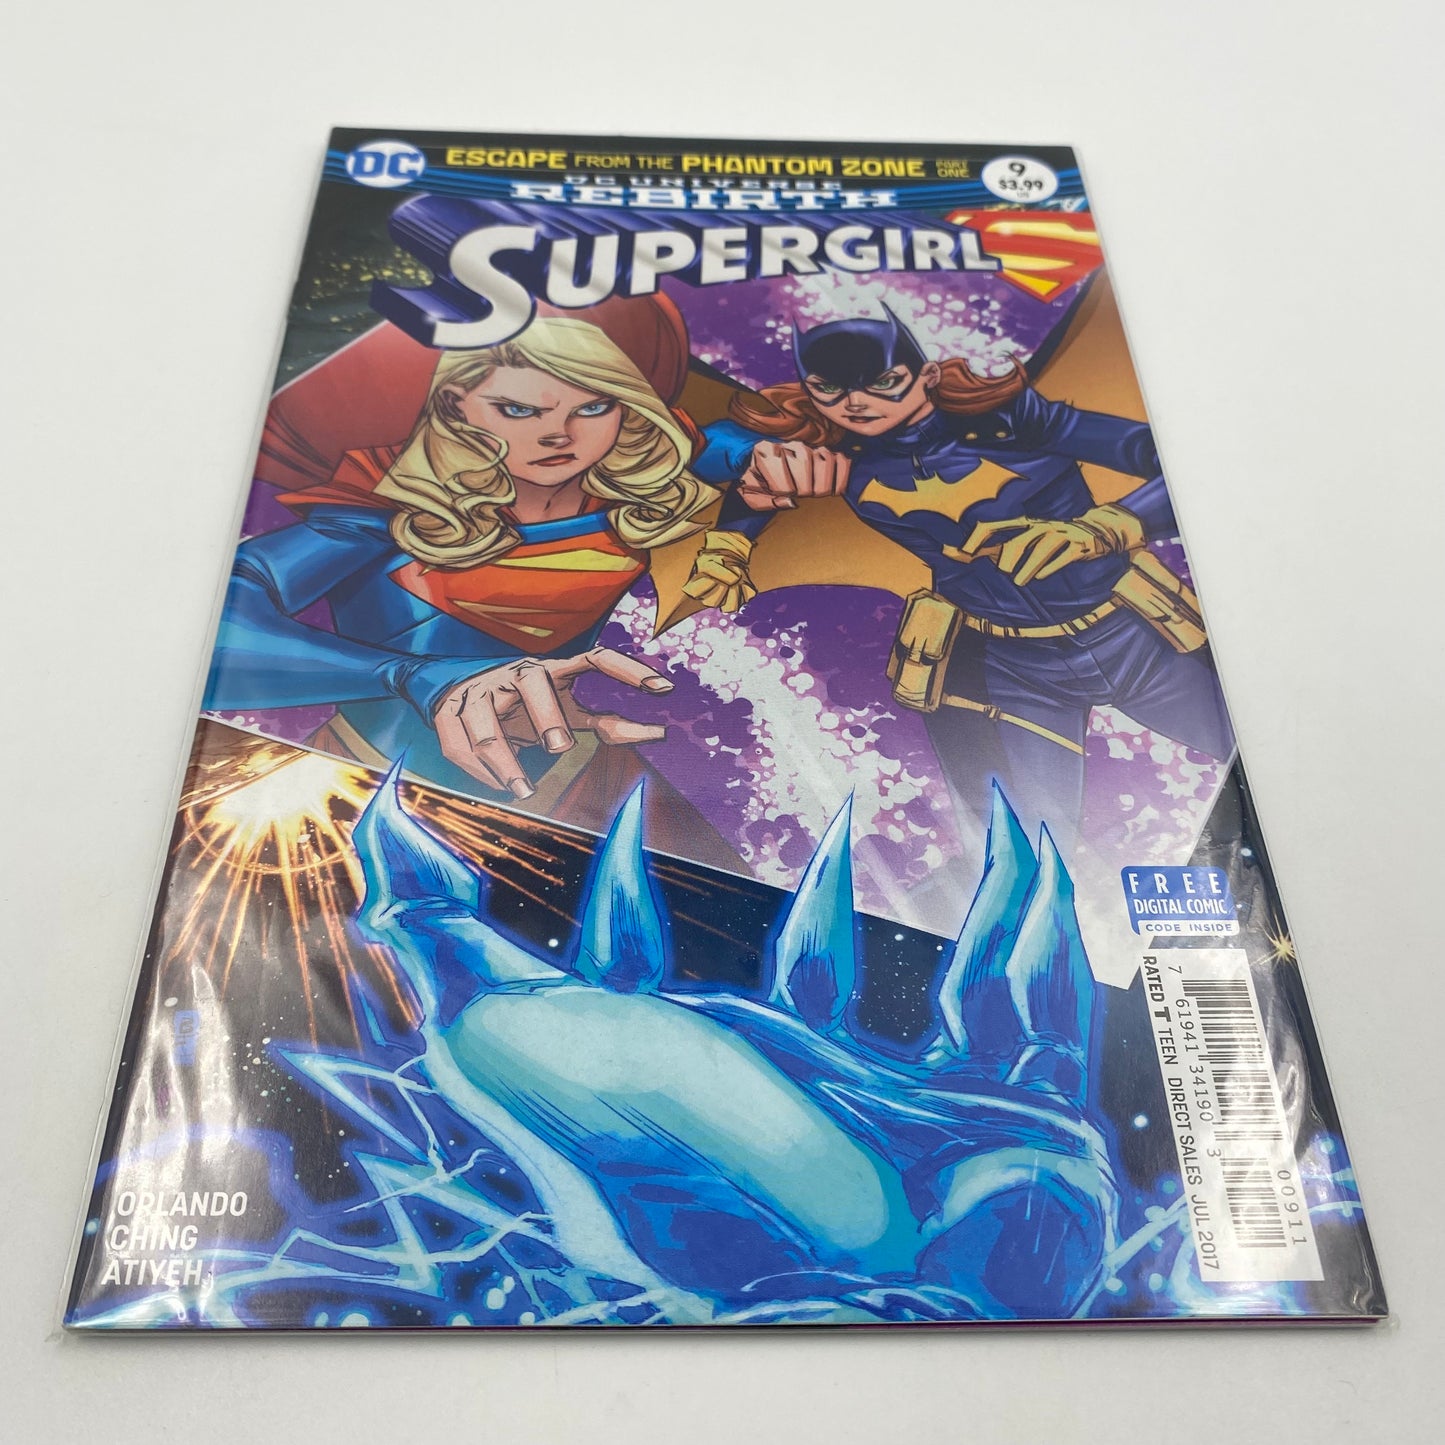 Supergirl #9-11 “Escape from the Phantom Zone” (2017) DC